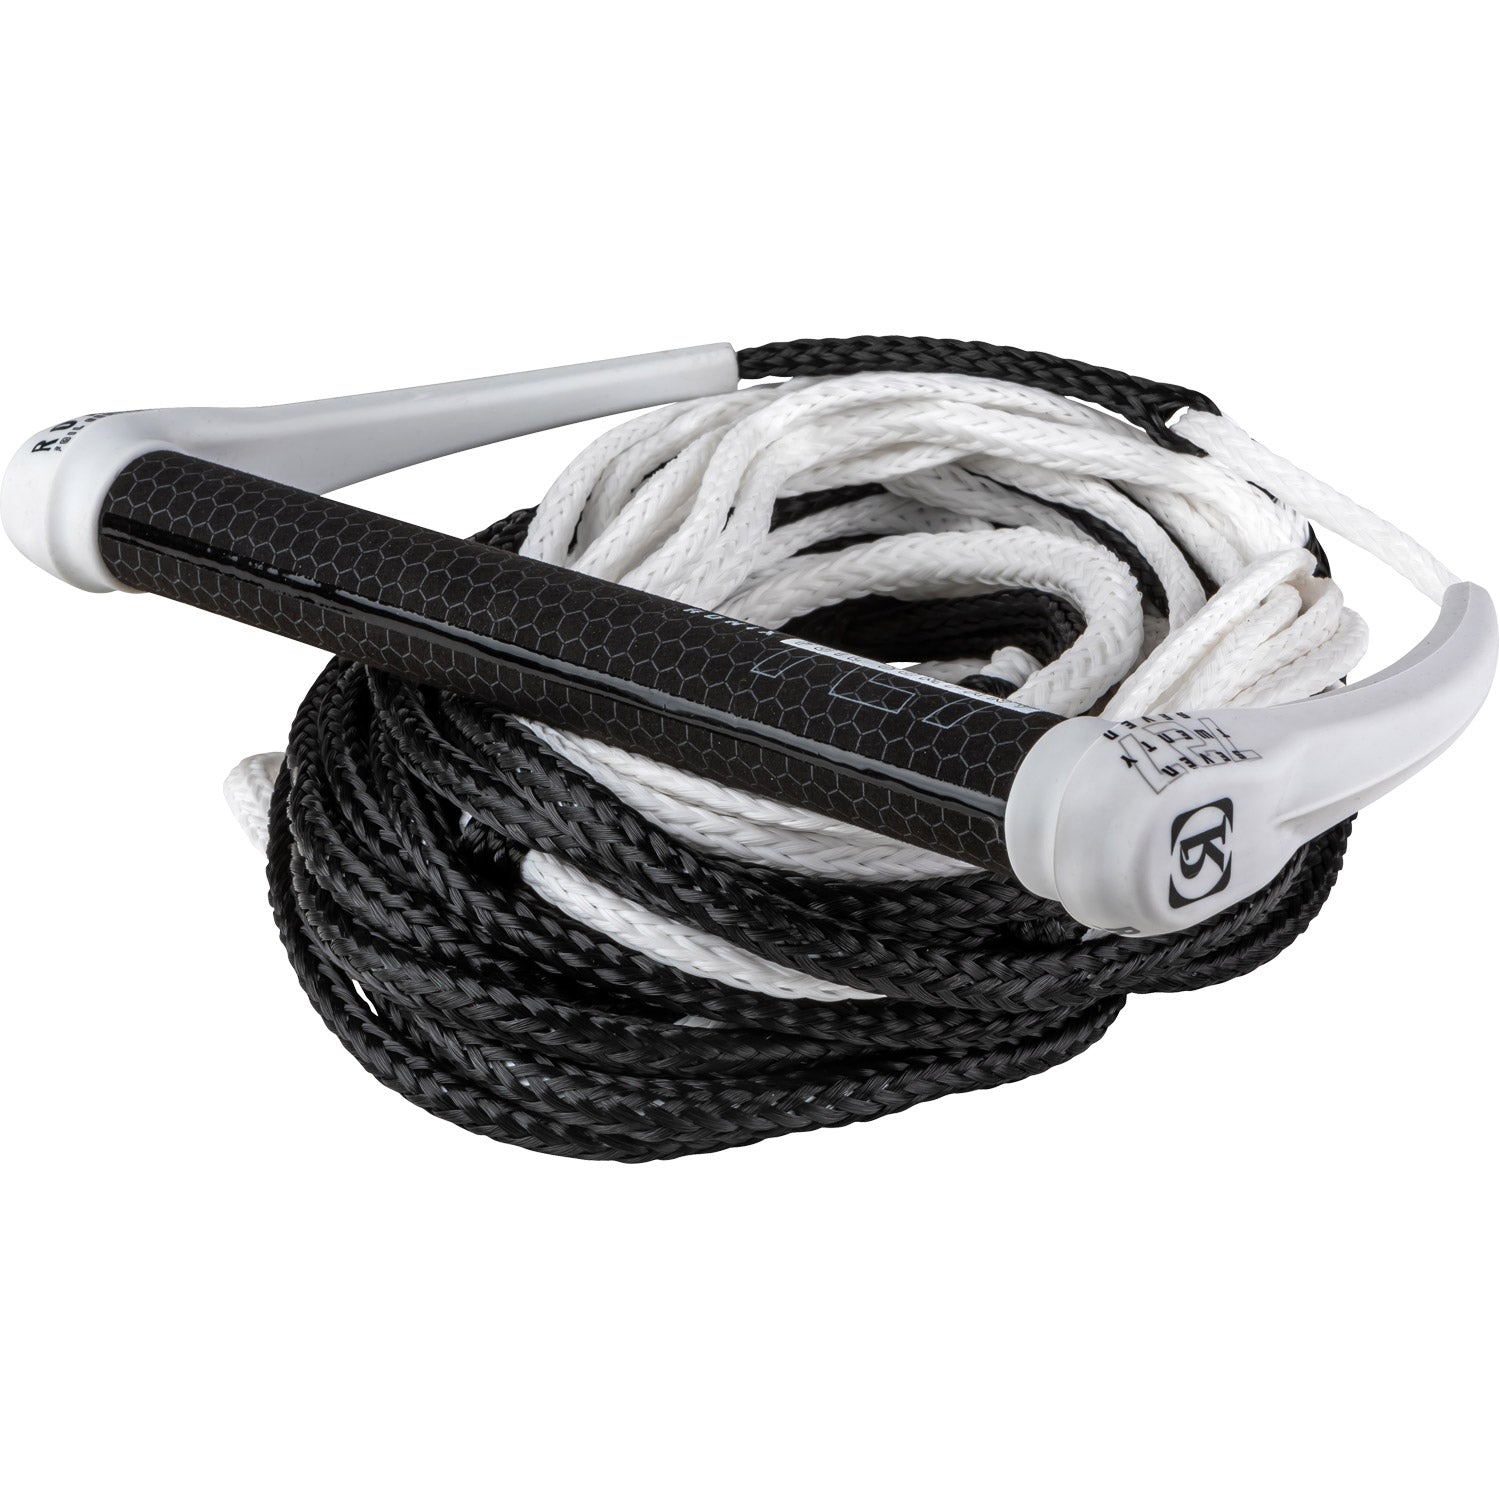 727 Foil Combo Wakeboard Rope Package